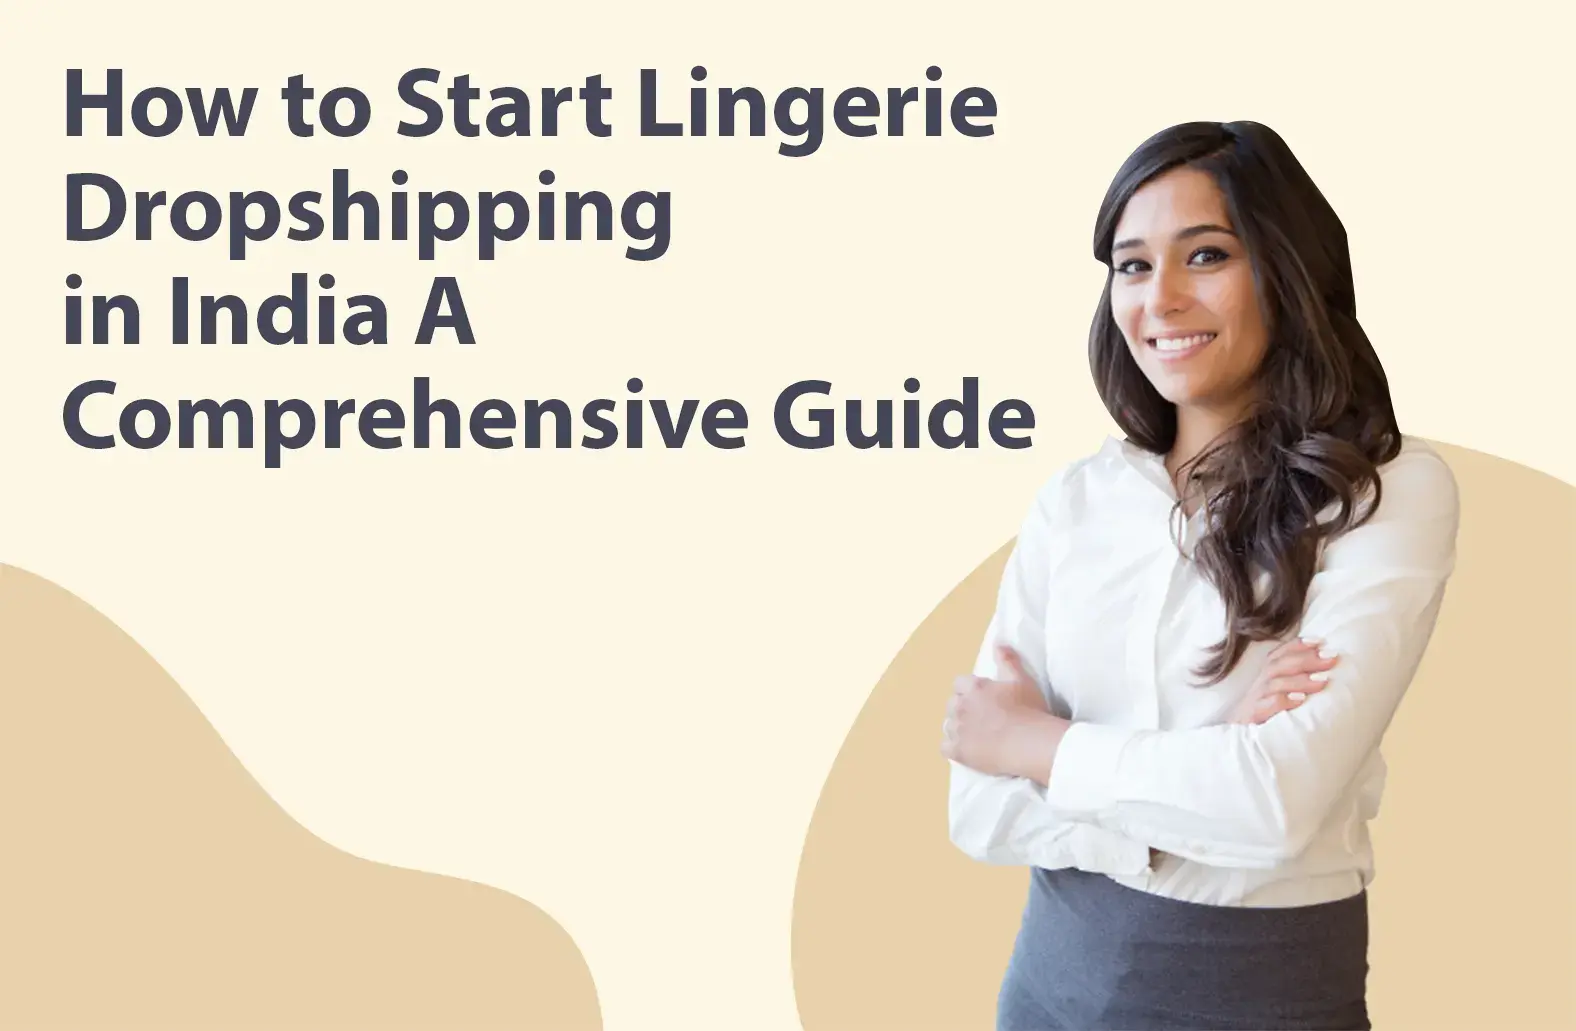 How to Start Lingerie Dropshipping in India: A Comprehensive Guide